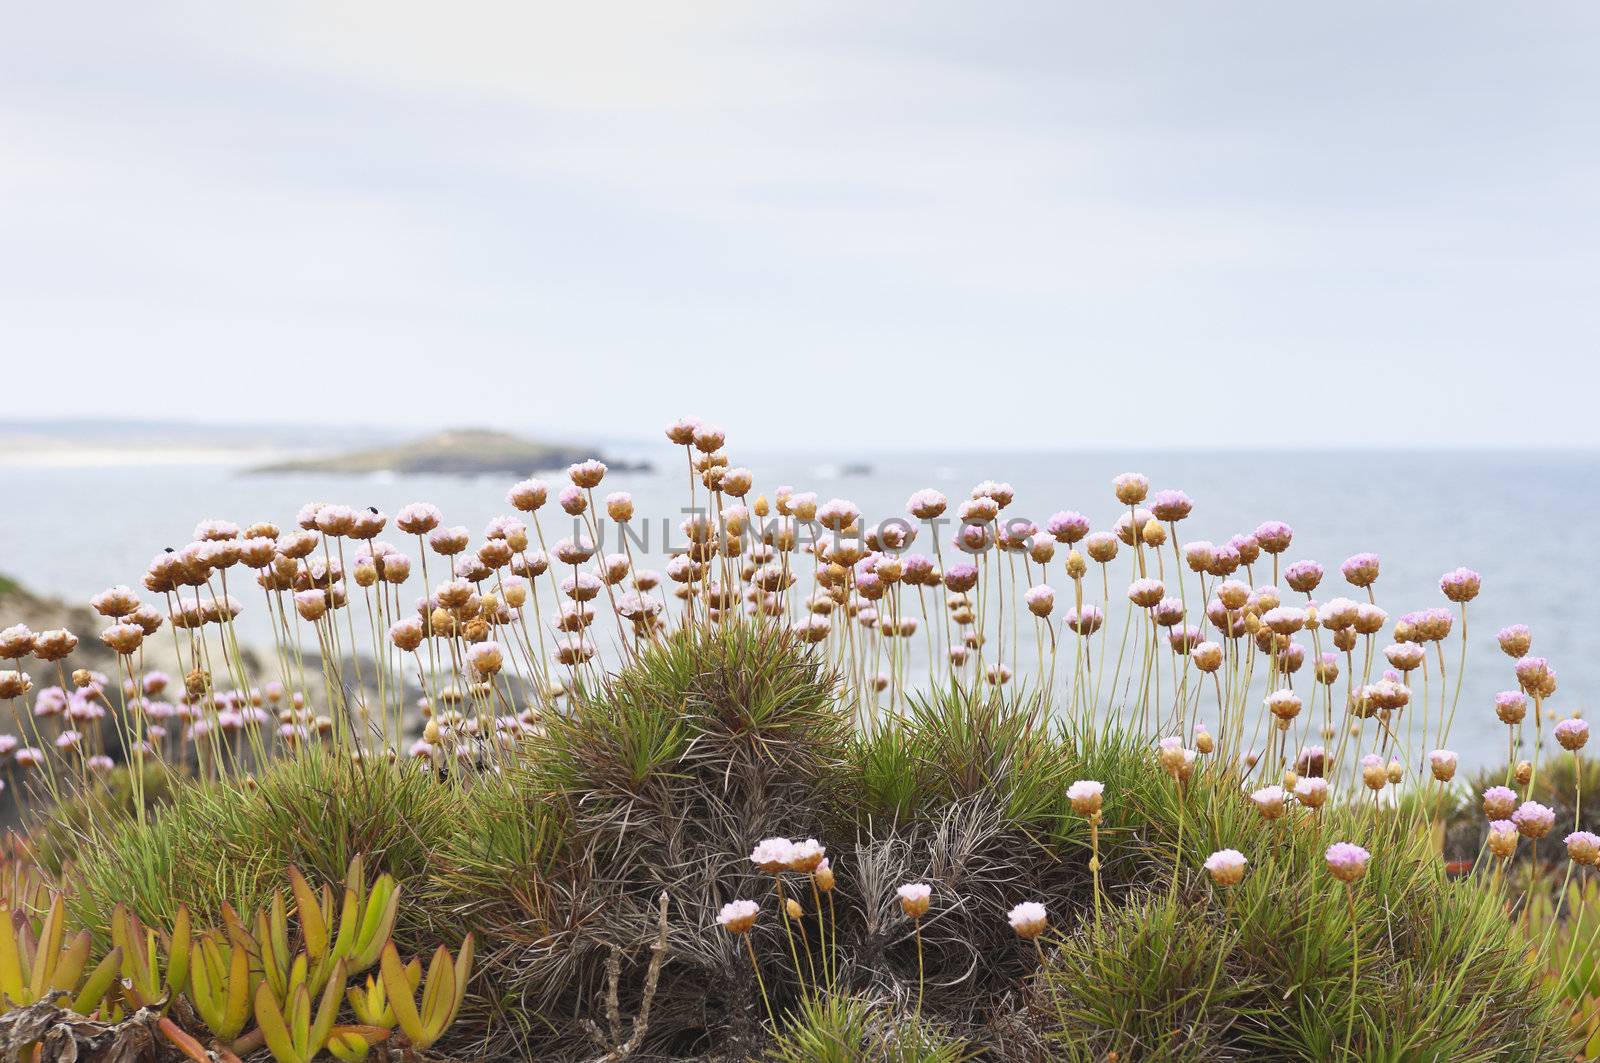 Spiny Thrift - Armeria pungens - in the portuguese coastline near Sines, Portugal